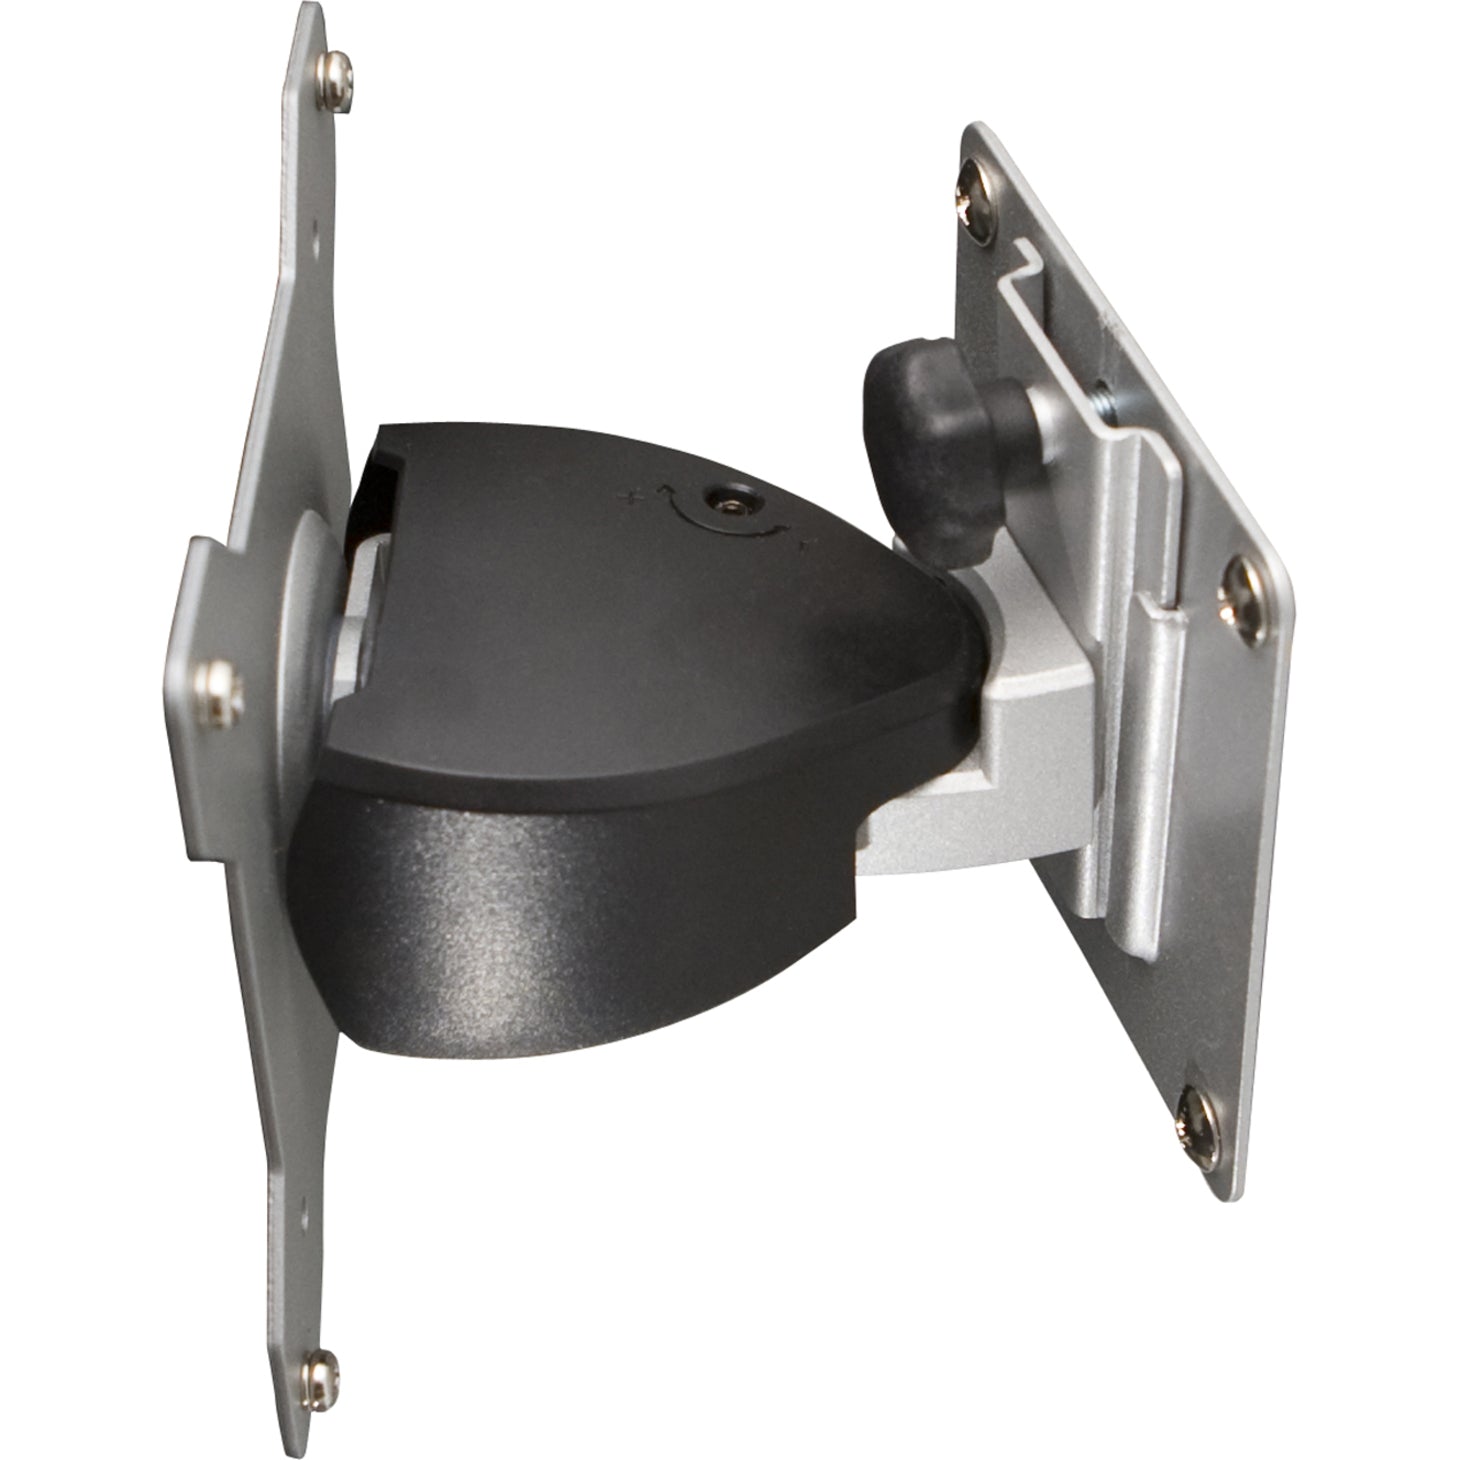 Planar 997-5546-00 Fixed Wall Mount, Supports up to 24" LCD Monitor